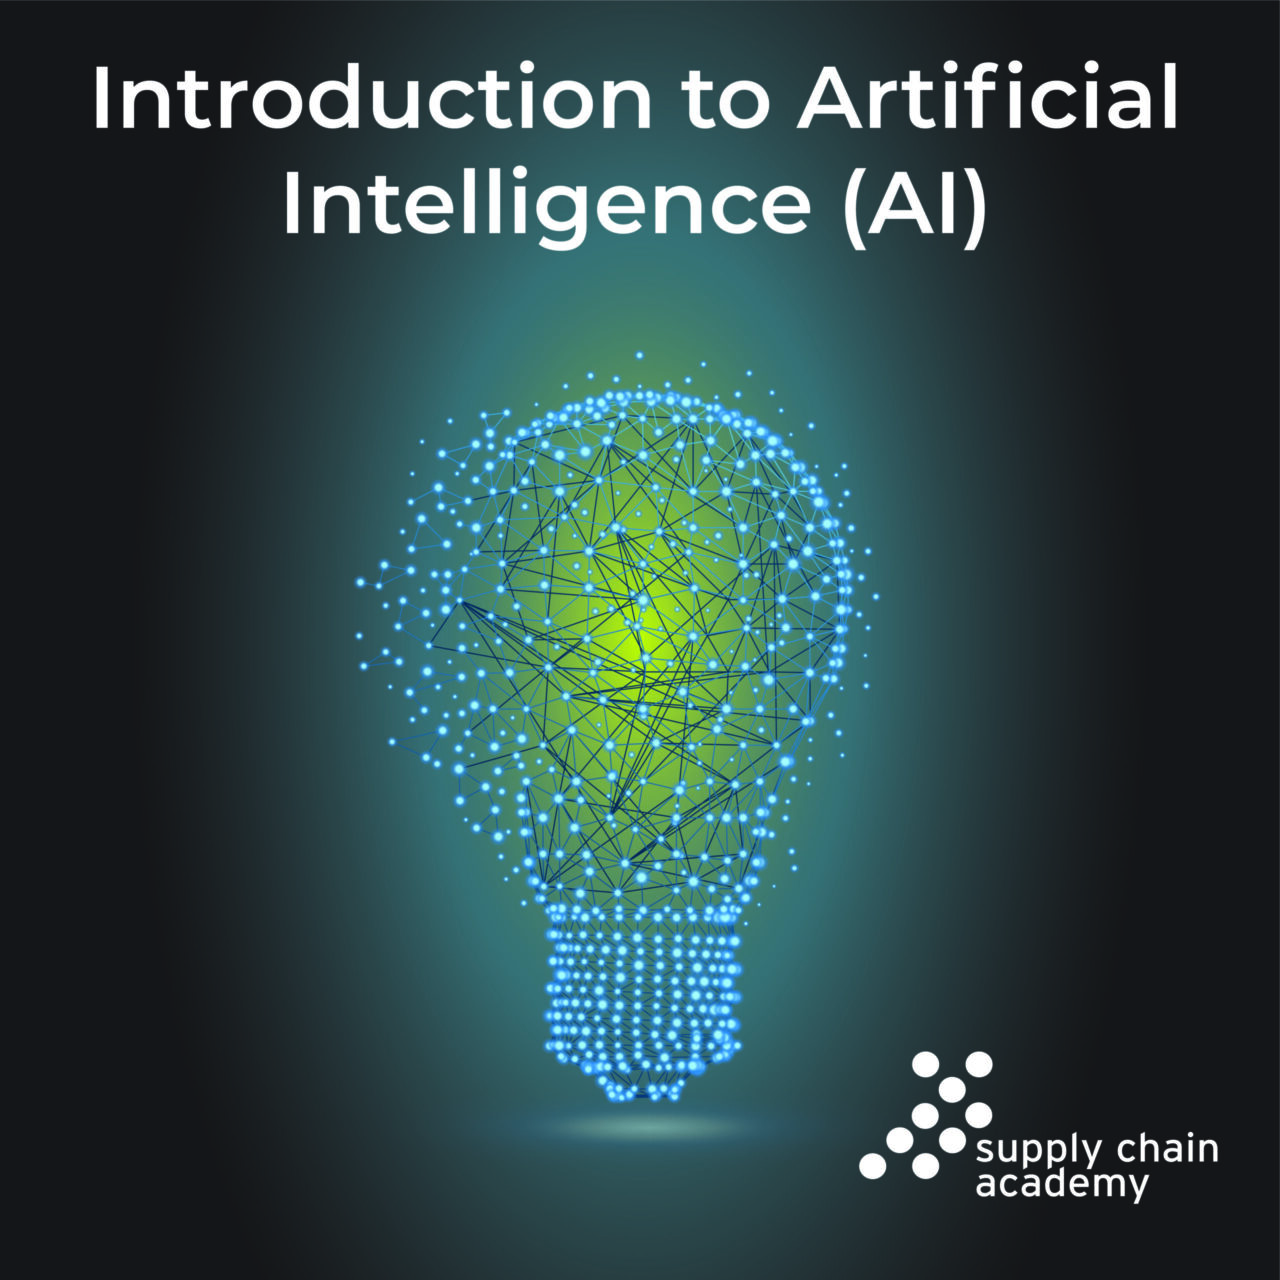 Introduction to Artificial Intelligence (AI) - The Supply Chain Academy